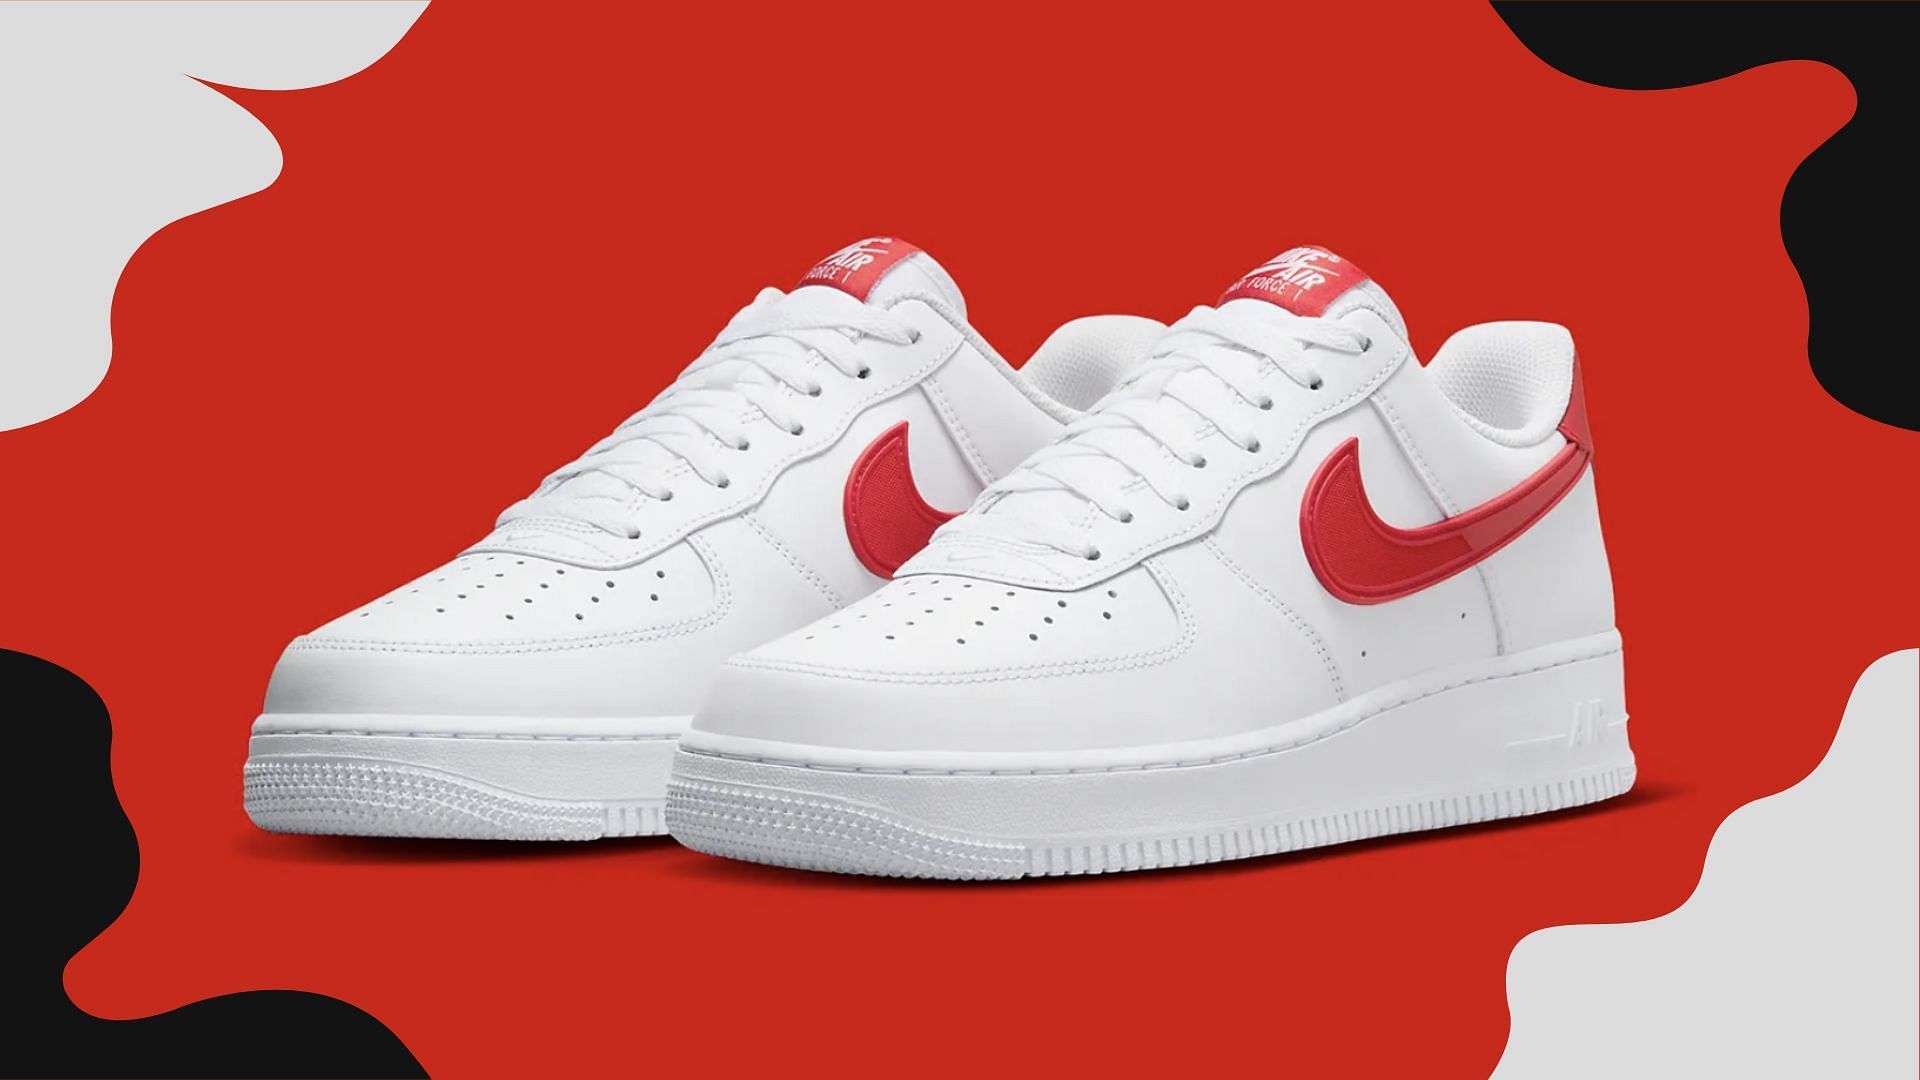 Nike Air Force 1 Low Silicon Swoosh sneakers (Image via YouTube/@ragnoupdates)